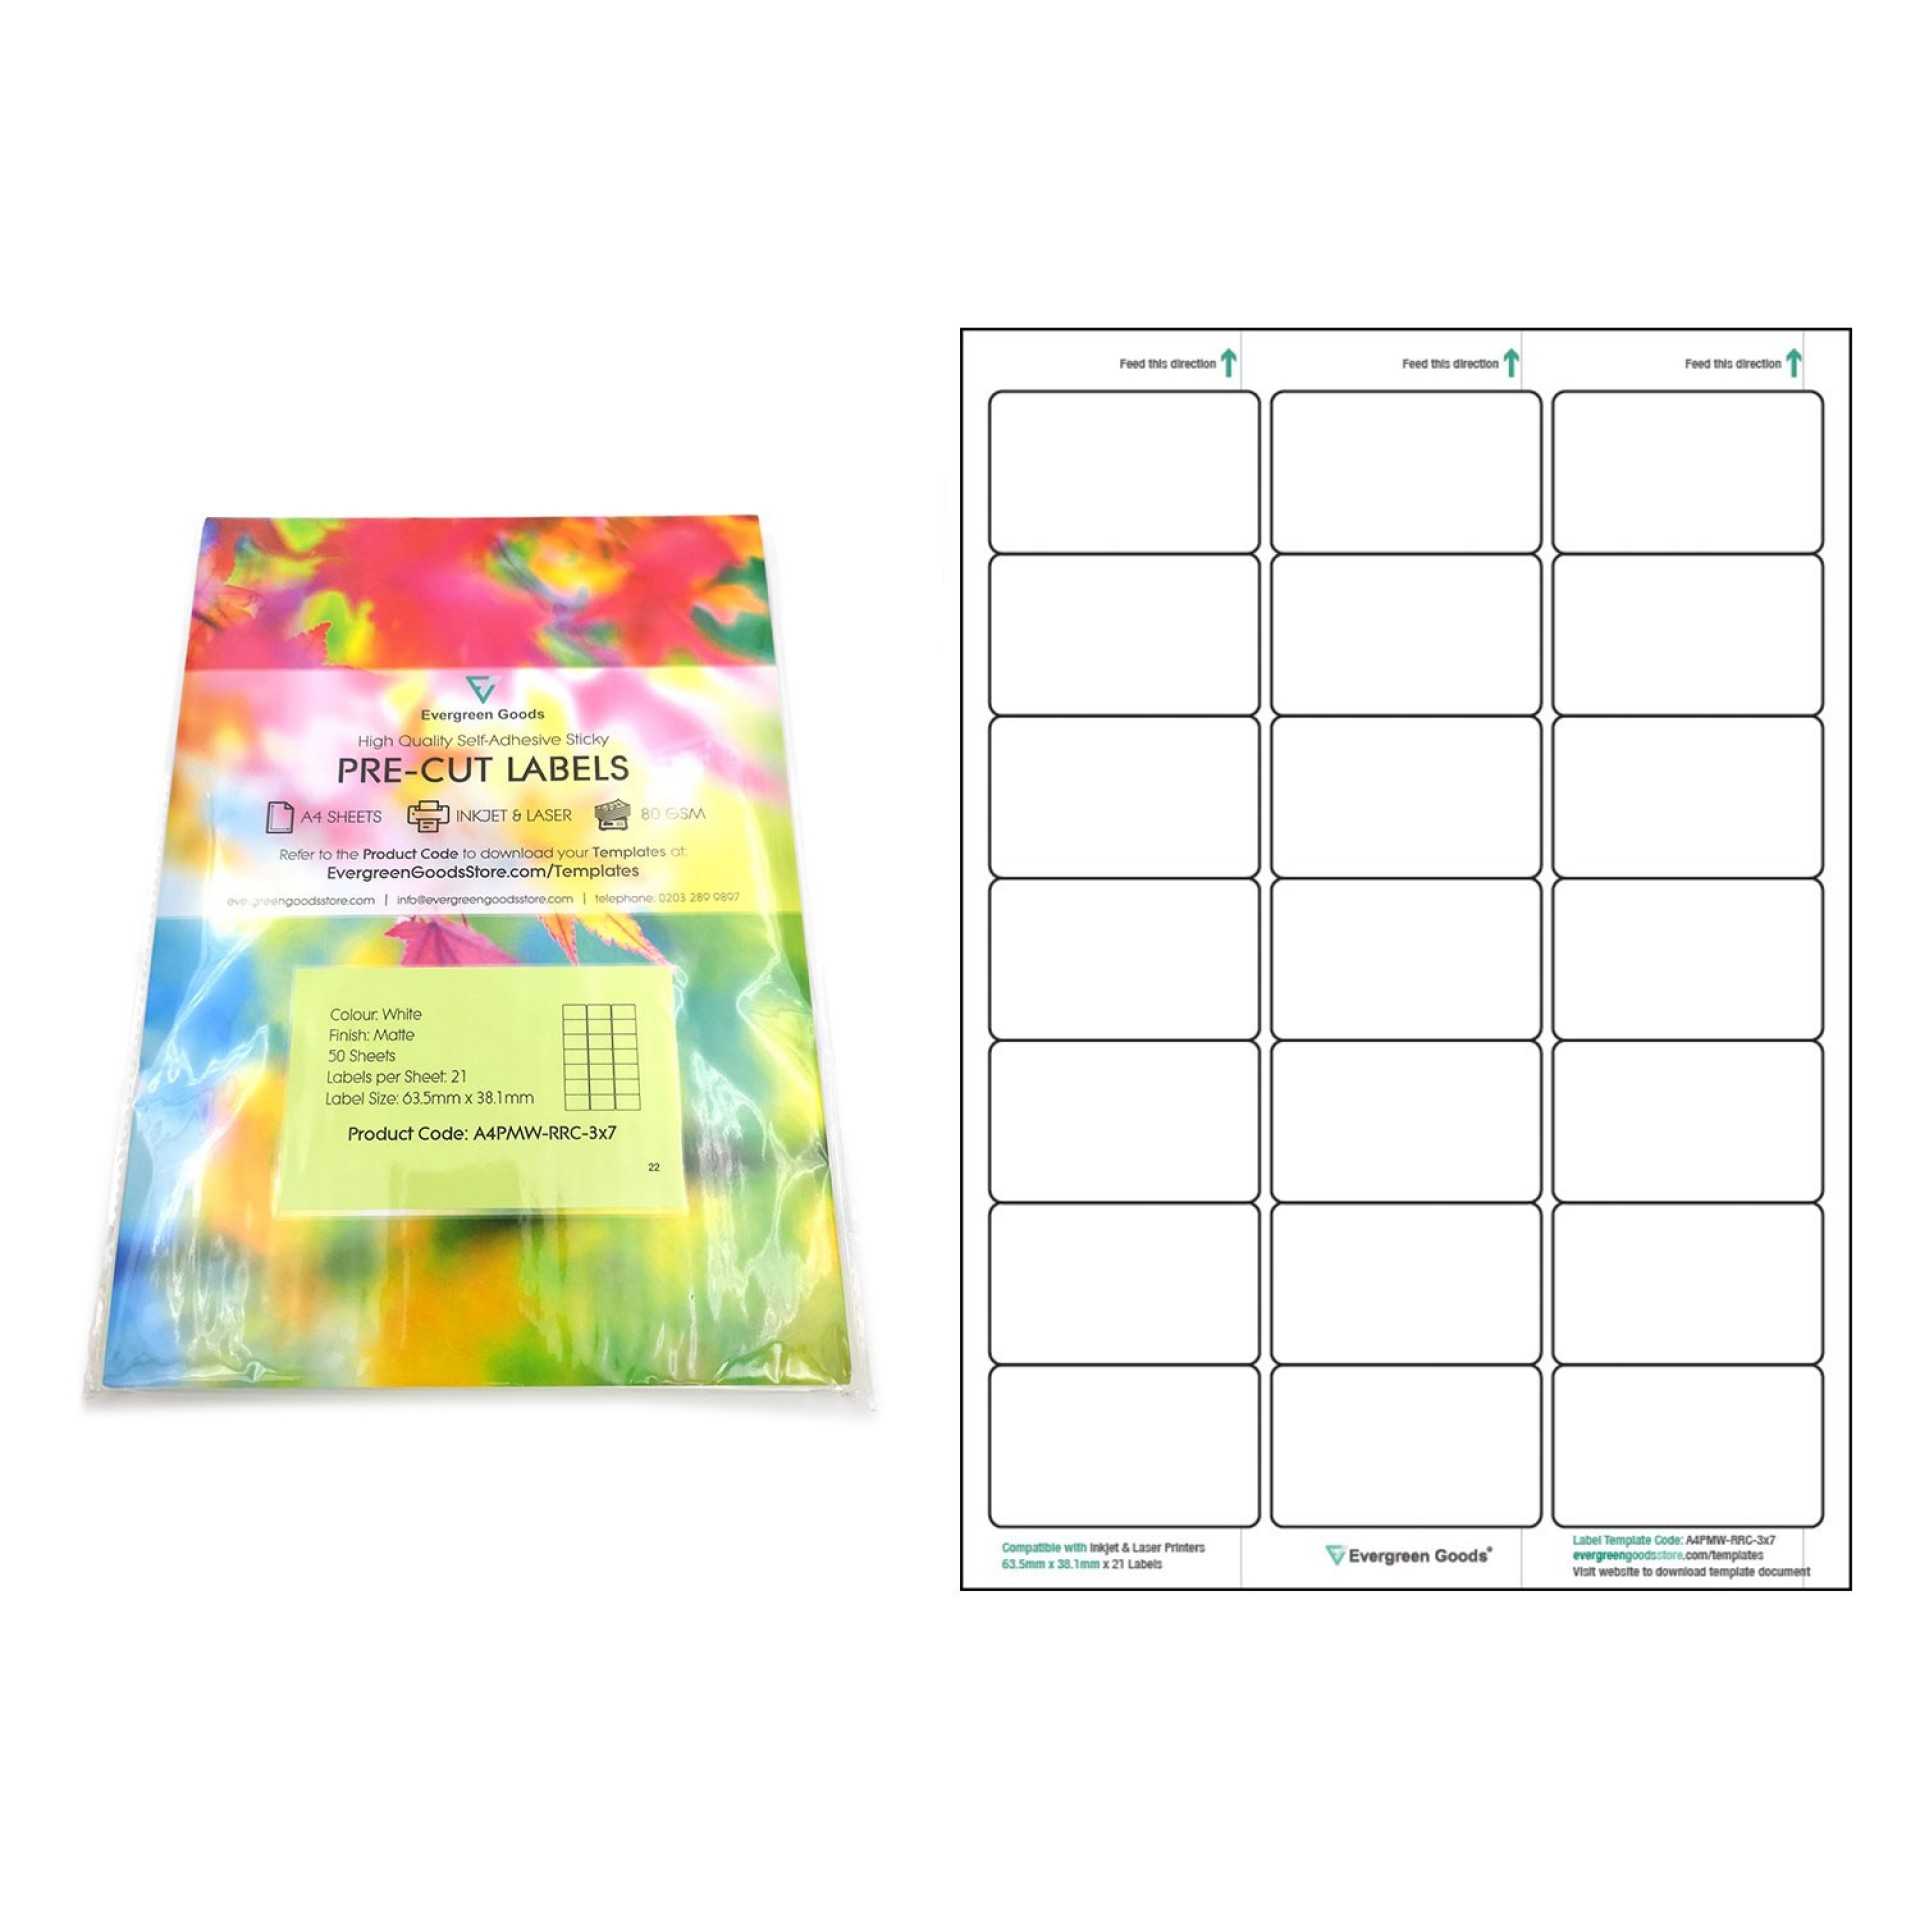 001 Word Label Template Per Sheet Ideas A4Pmw Rrc 3X7 Within Label Template 21 Per Sheet Word